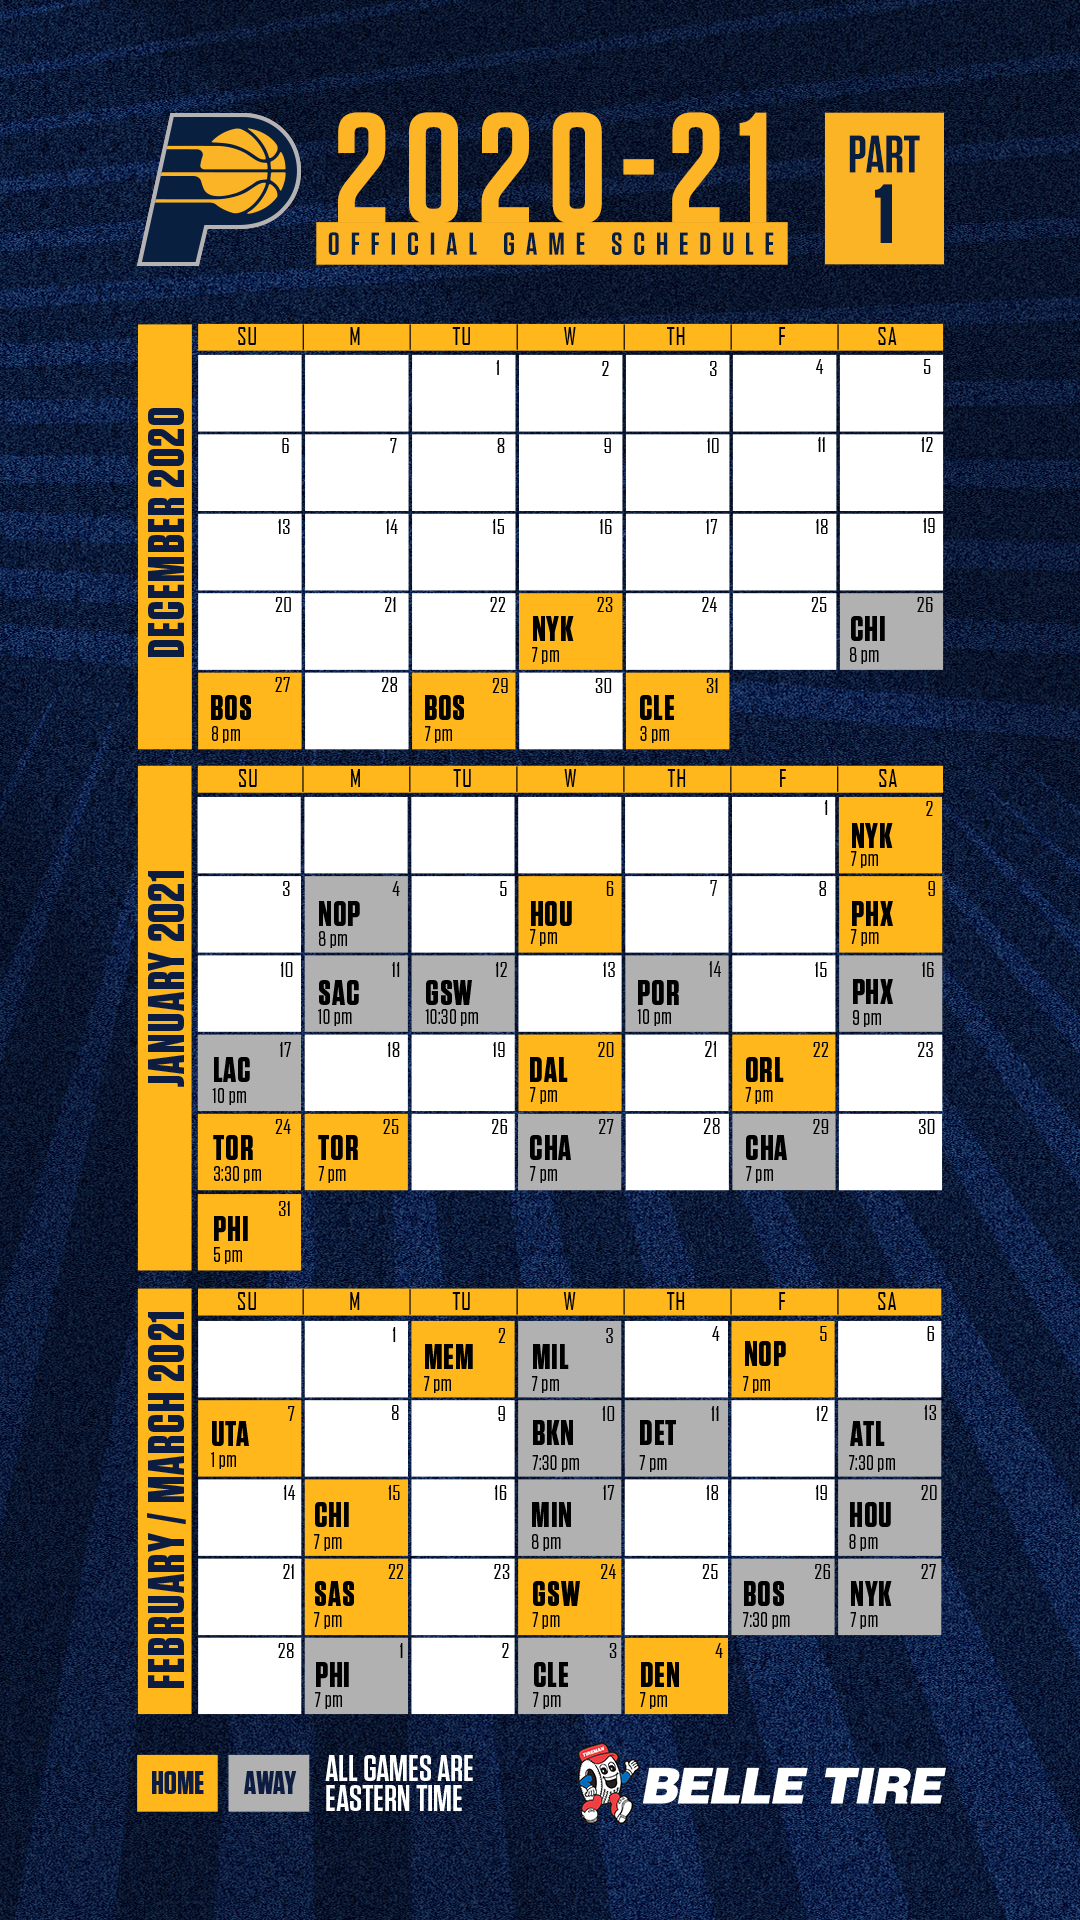 Indiana Pacers Schedule